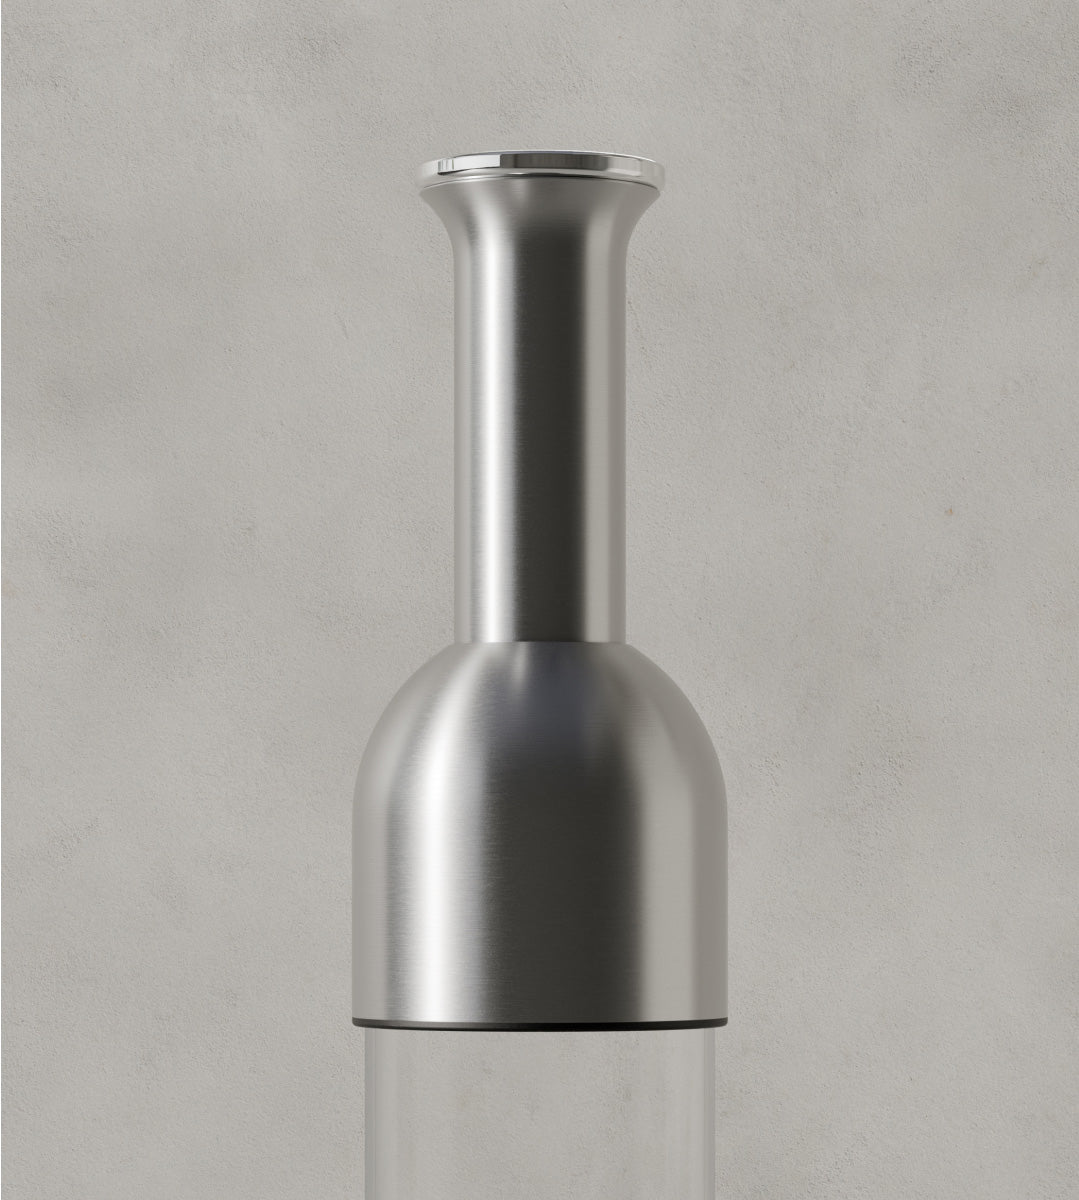 eto wine decanter in stainless satin finish